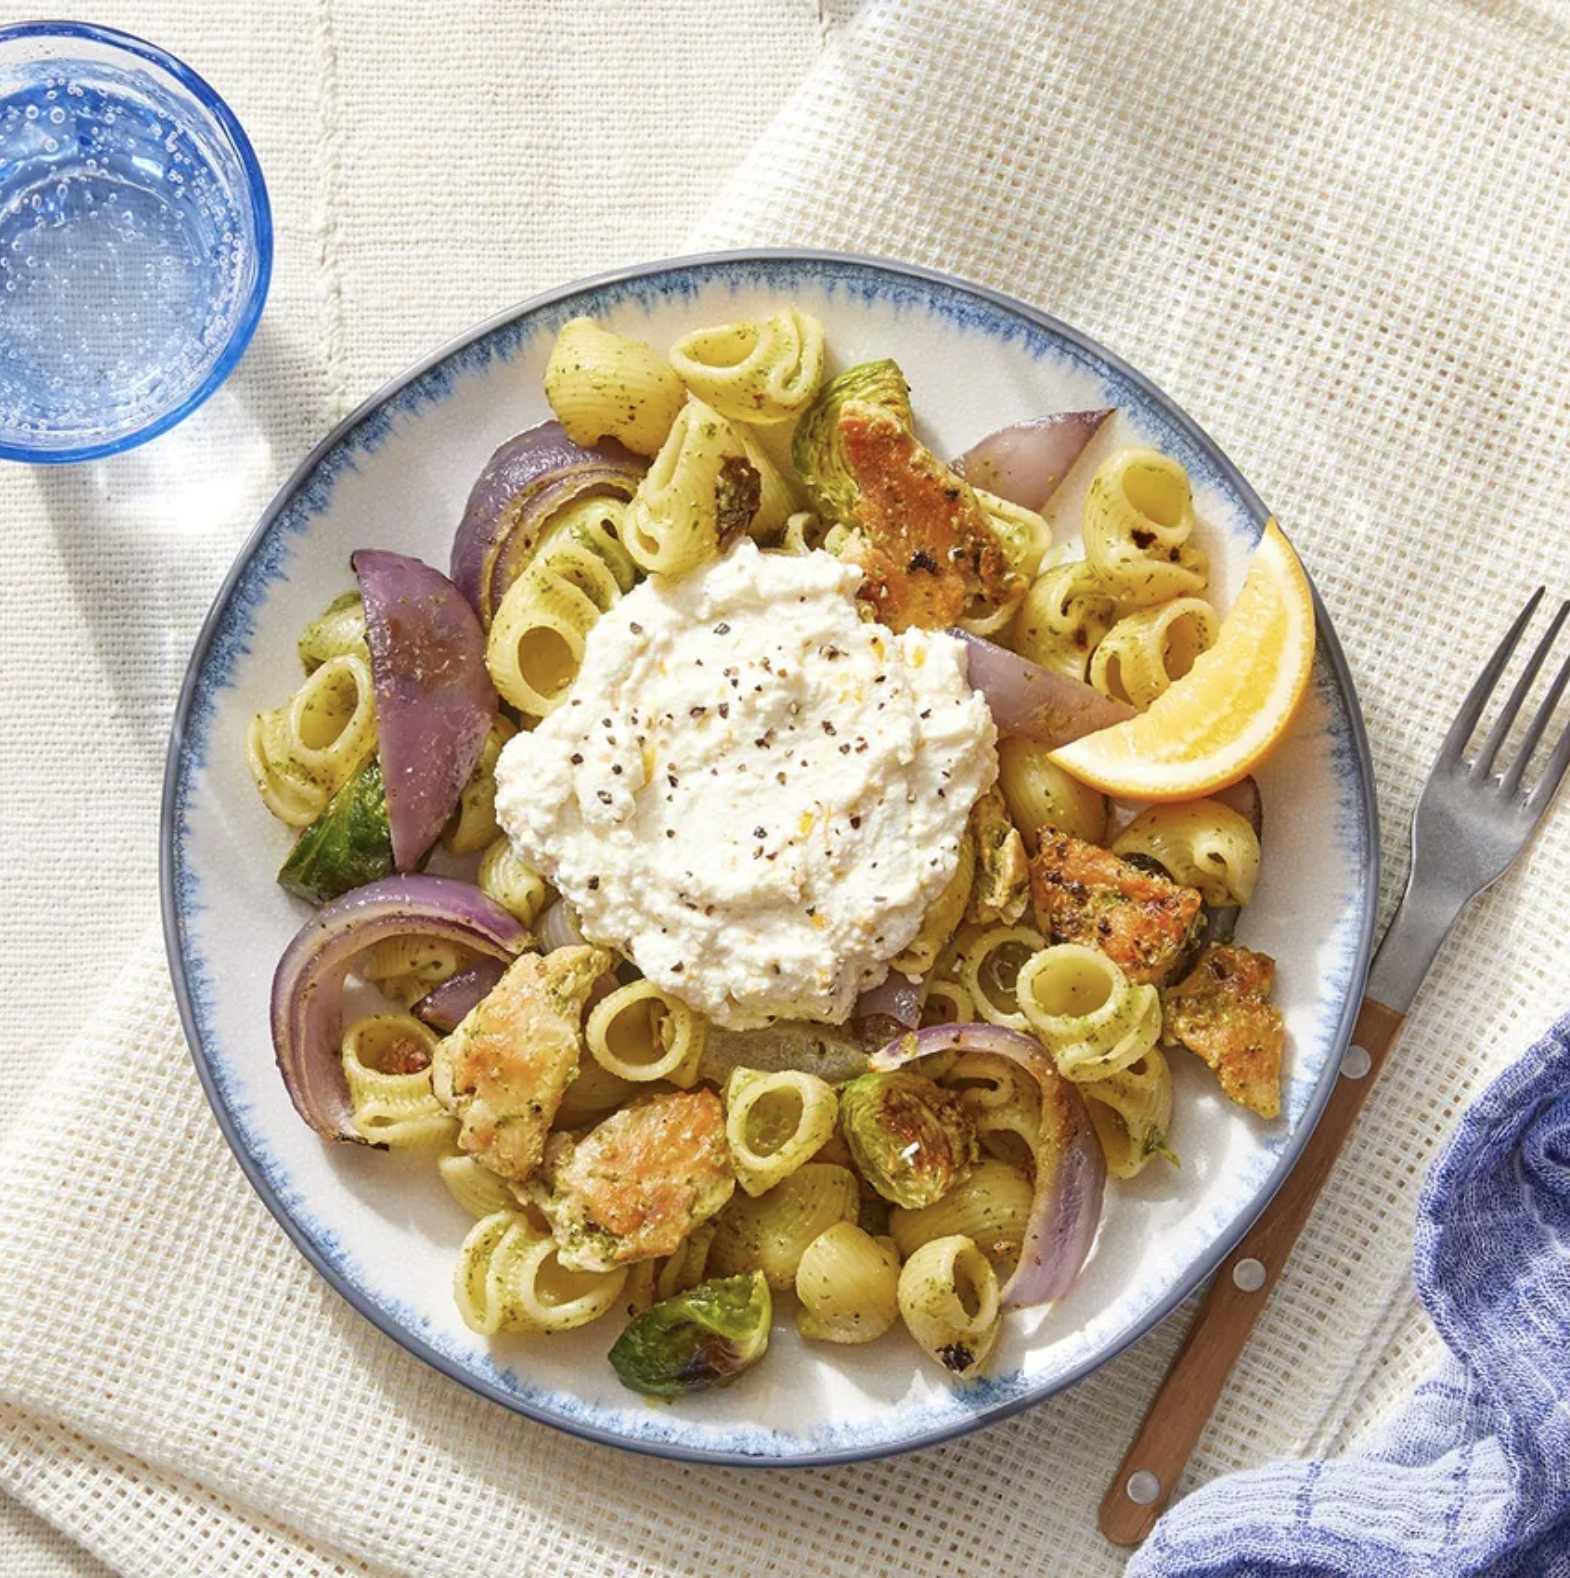 Pesto chicken pasta with red onions, ricotta, Brussels sprouts, and lemon on top